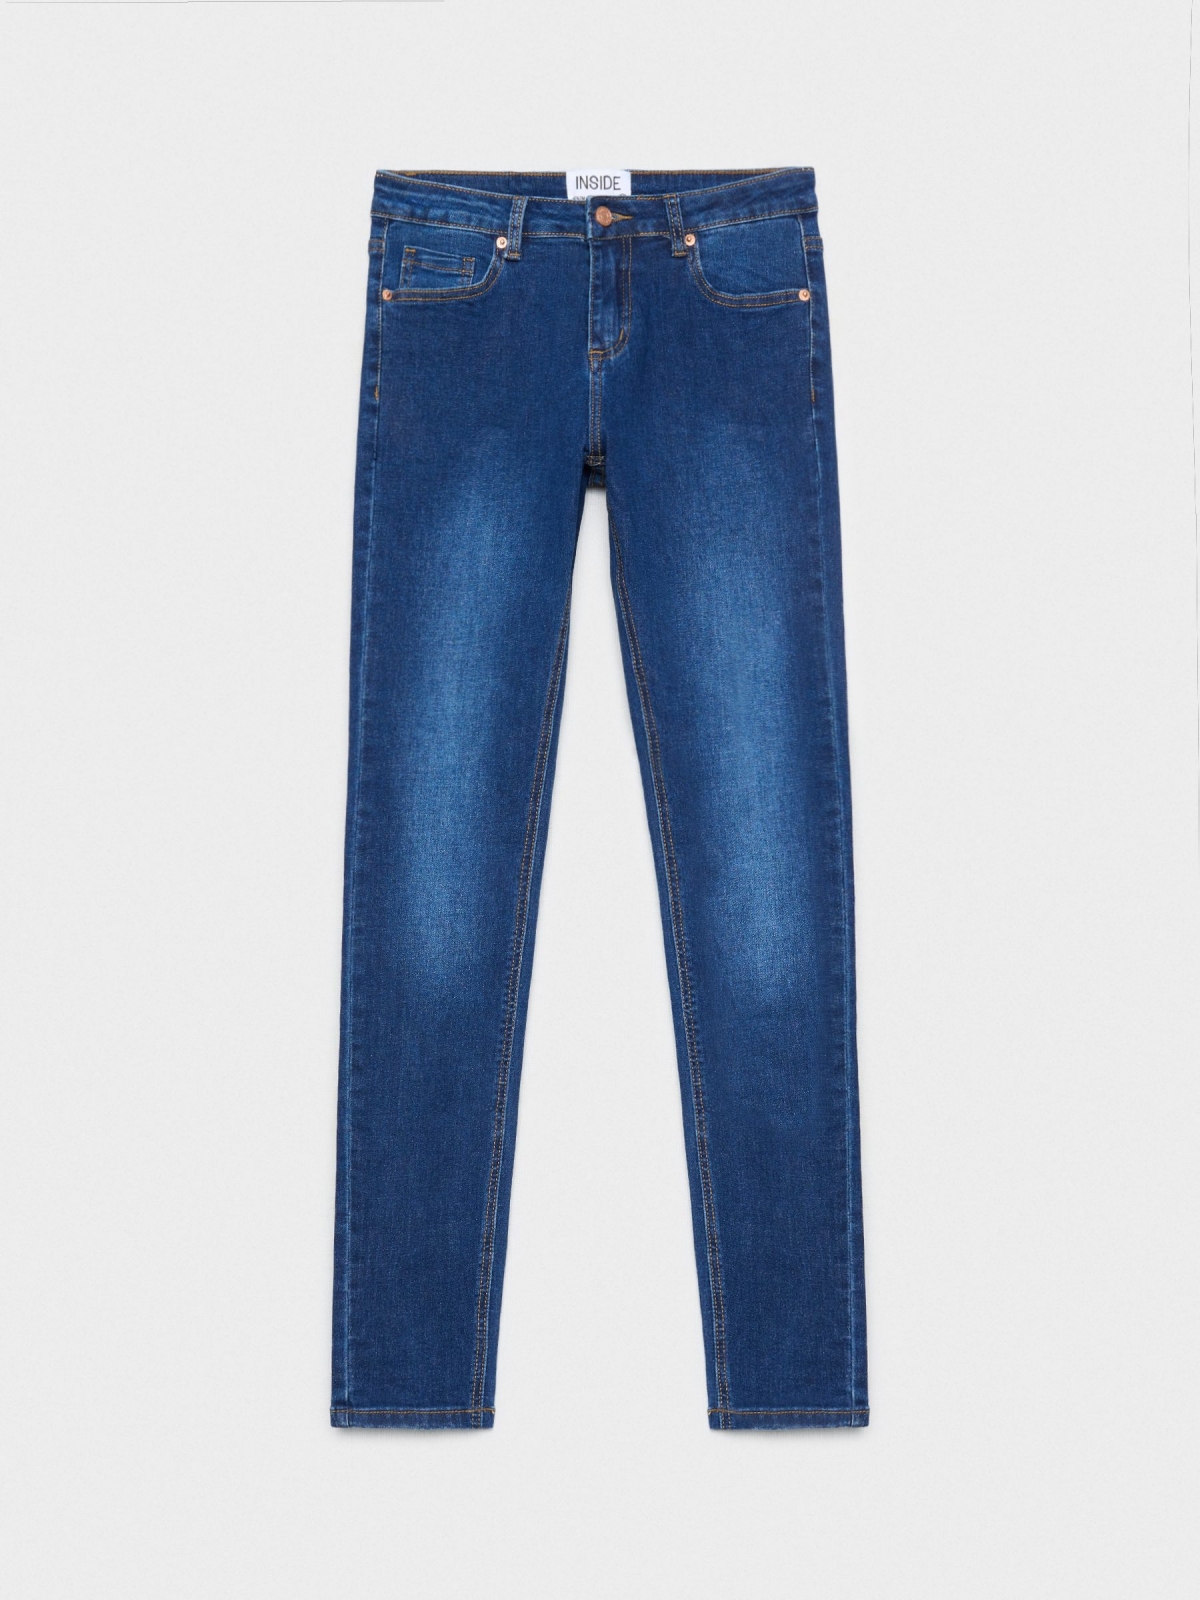  Mid rise skinny jeans blue